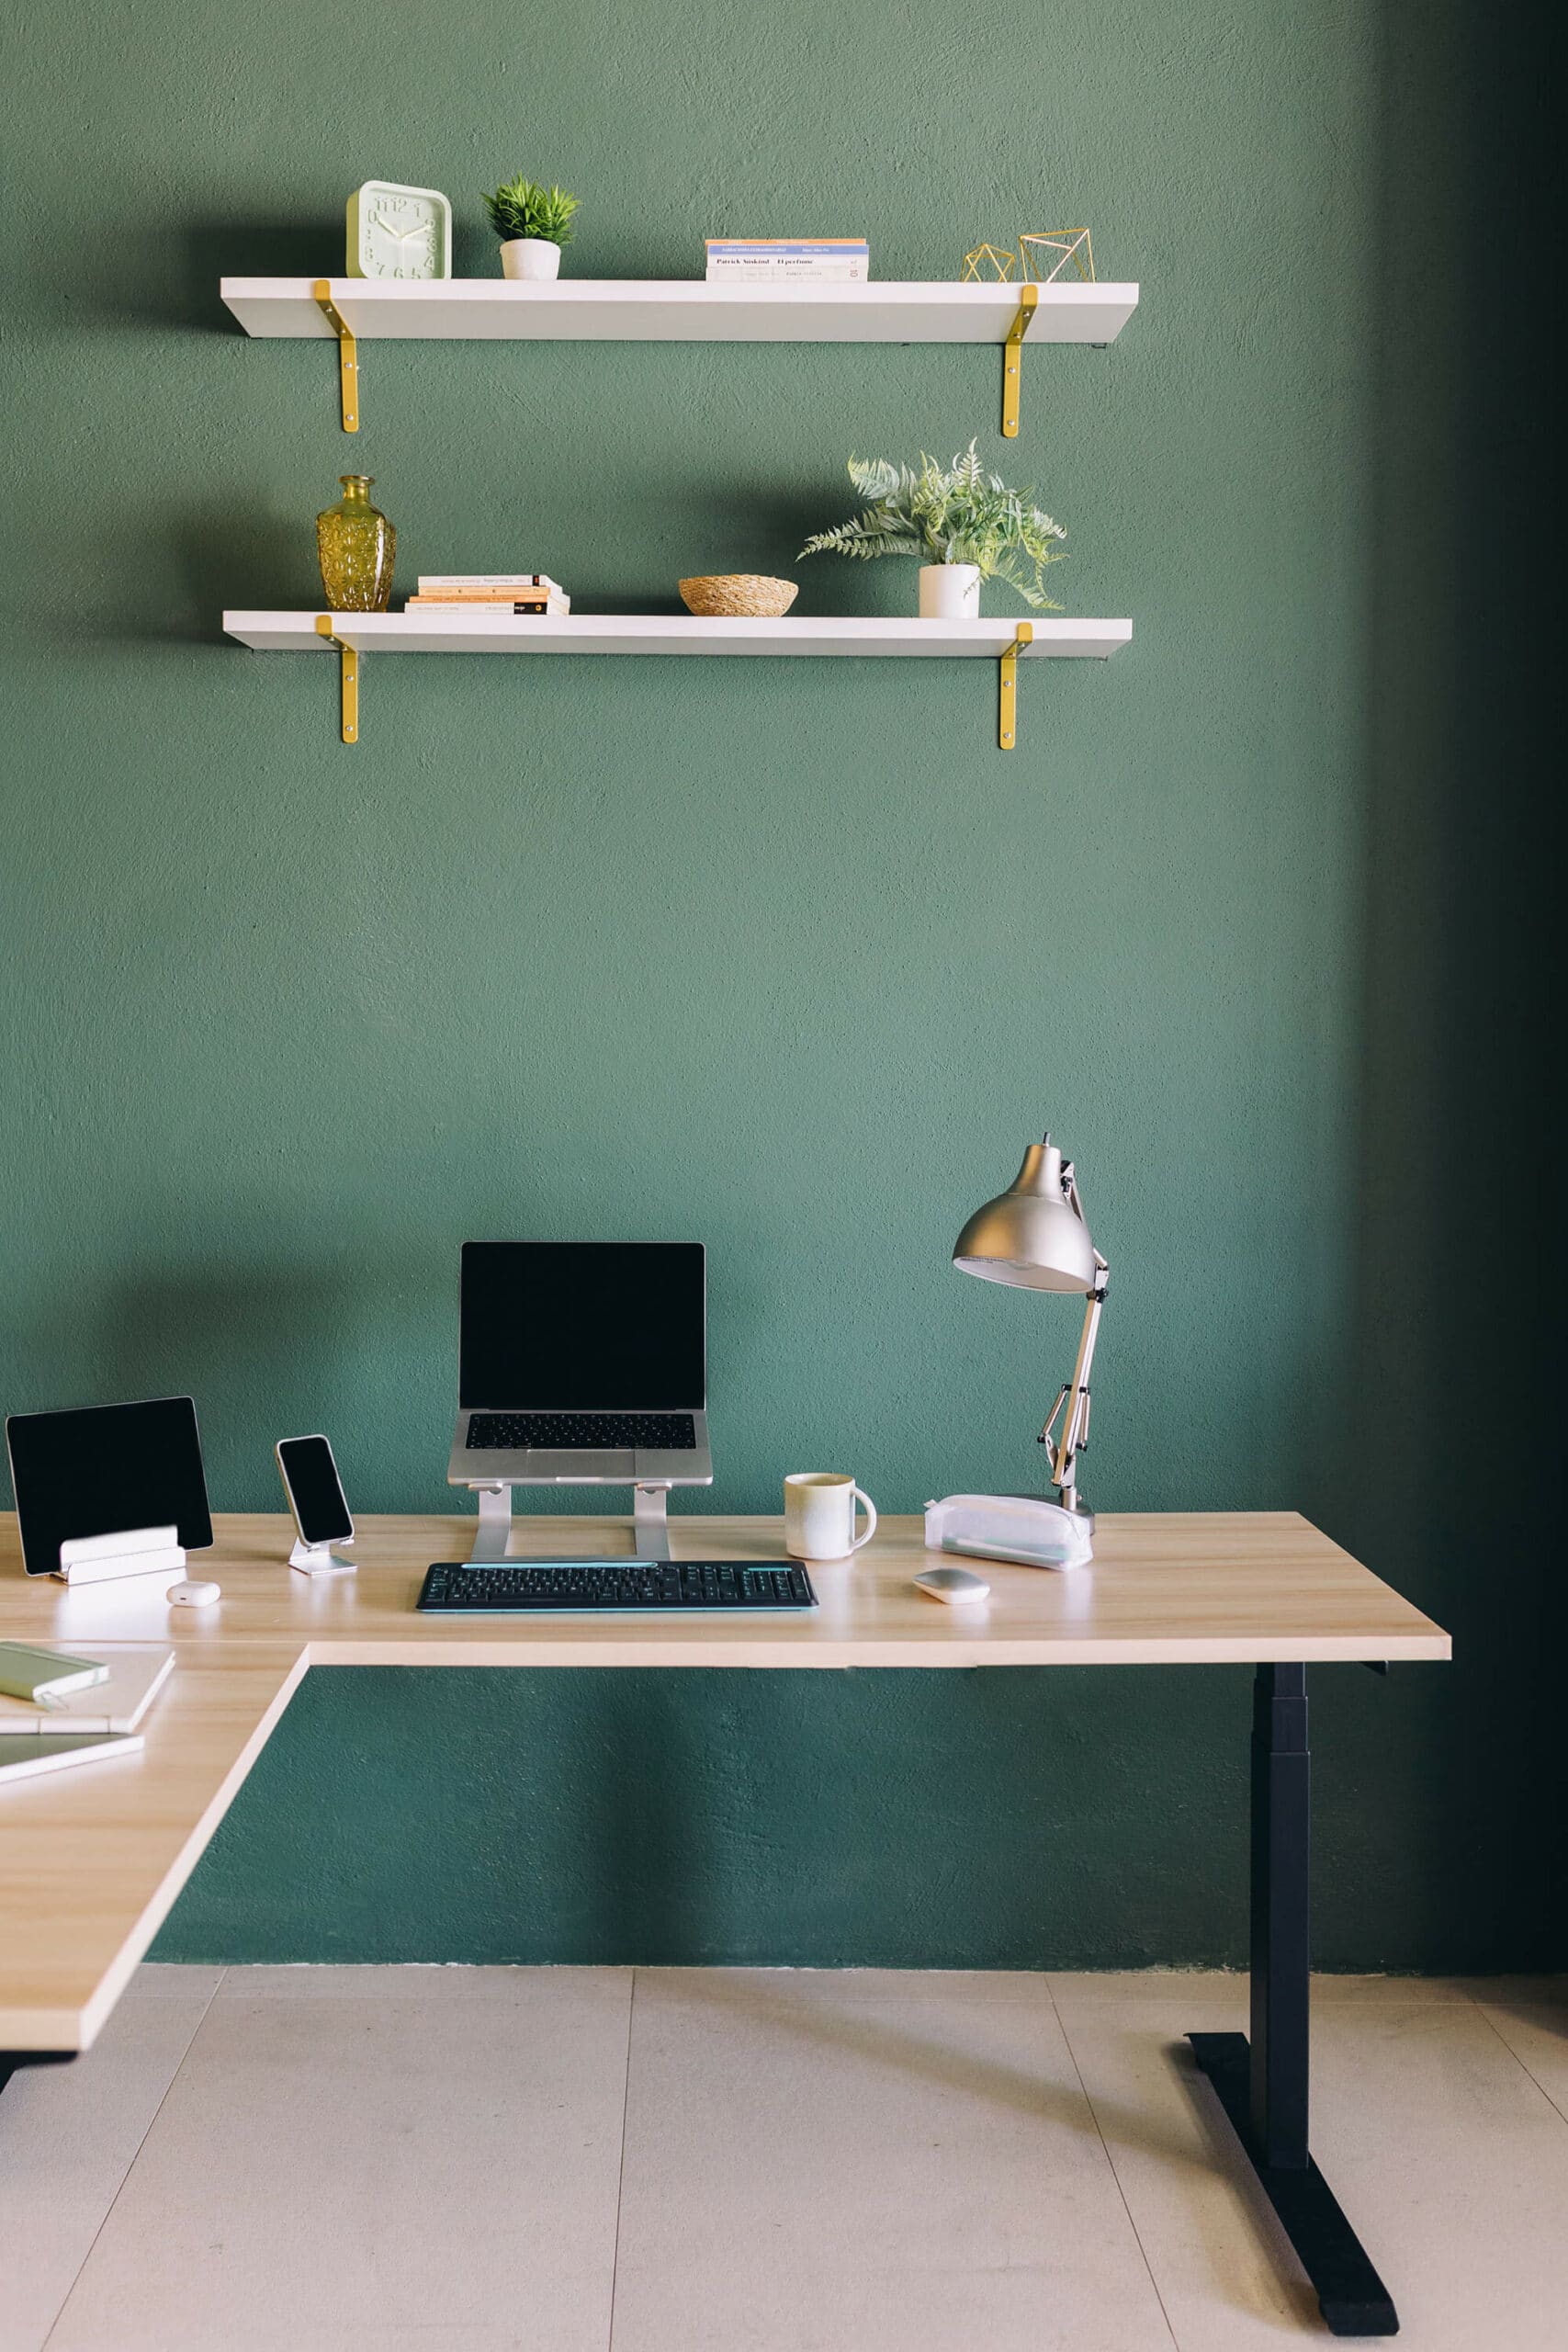 A minimalist home office setup with a light wooden desk against a green wall, equipped with a laptop raised on a stand, a tablet, a smartphone, a desk lamp, a cup, and some stationery. Two white shelves with decorative items and plants are mounted above the desk.